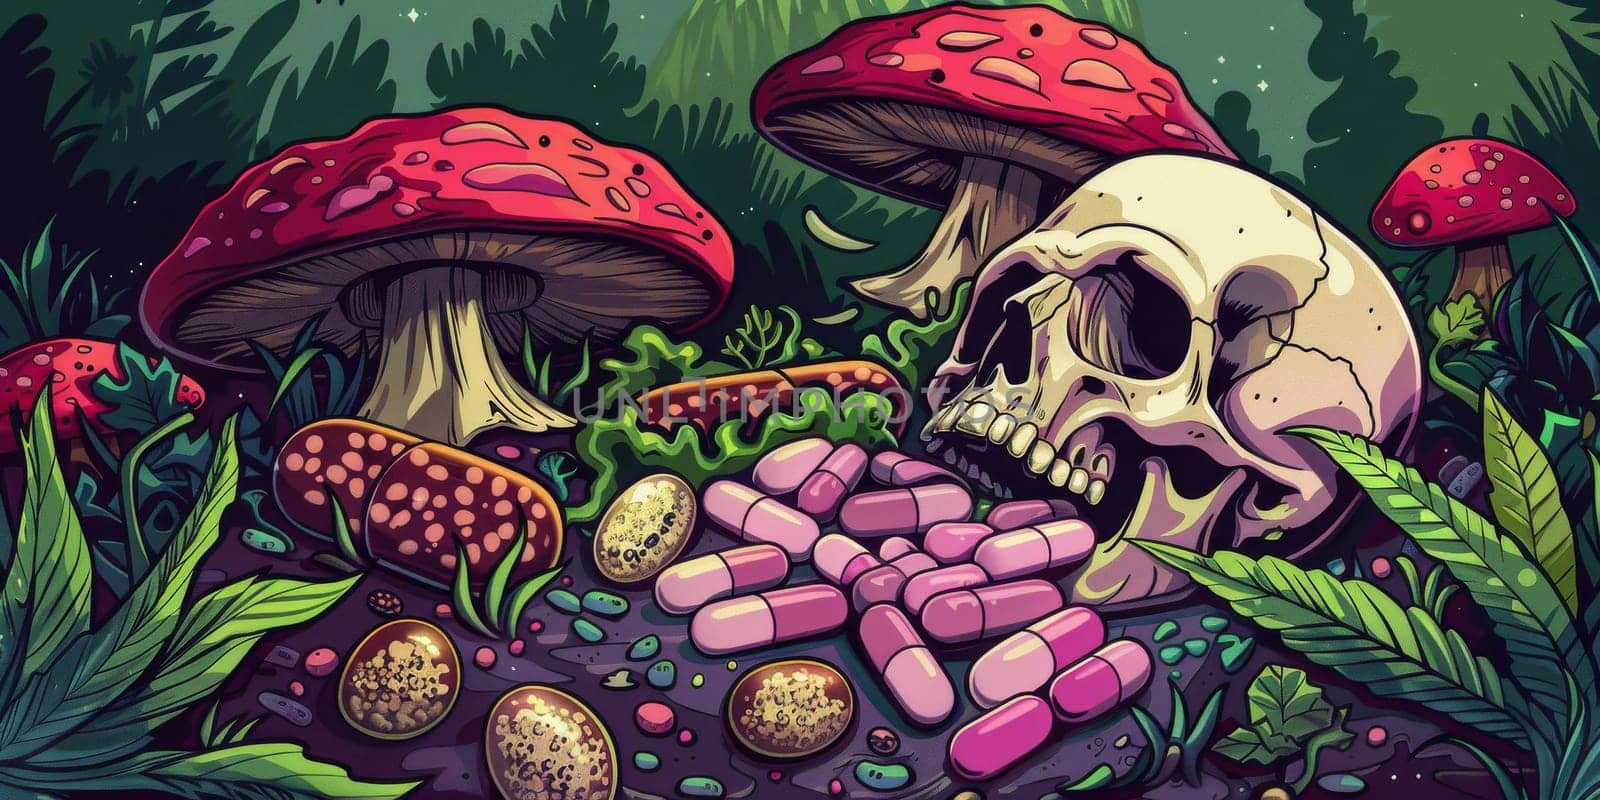 Mushrooms grouped around central skull in mysterious setting